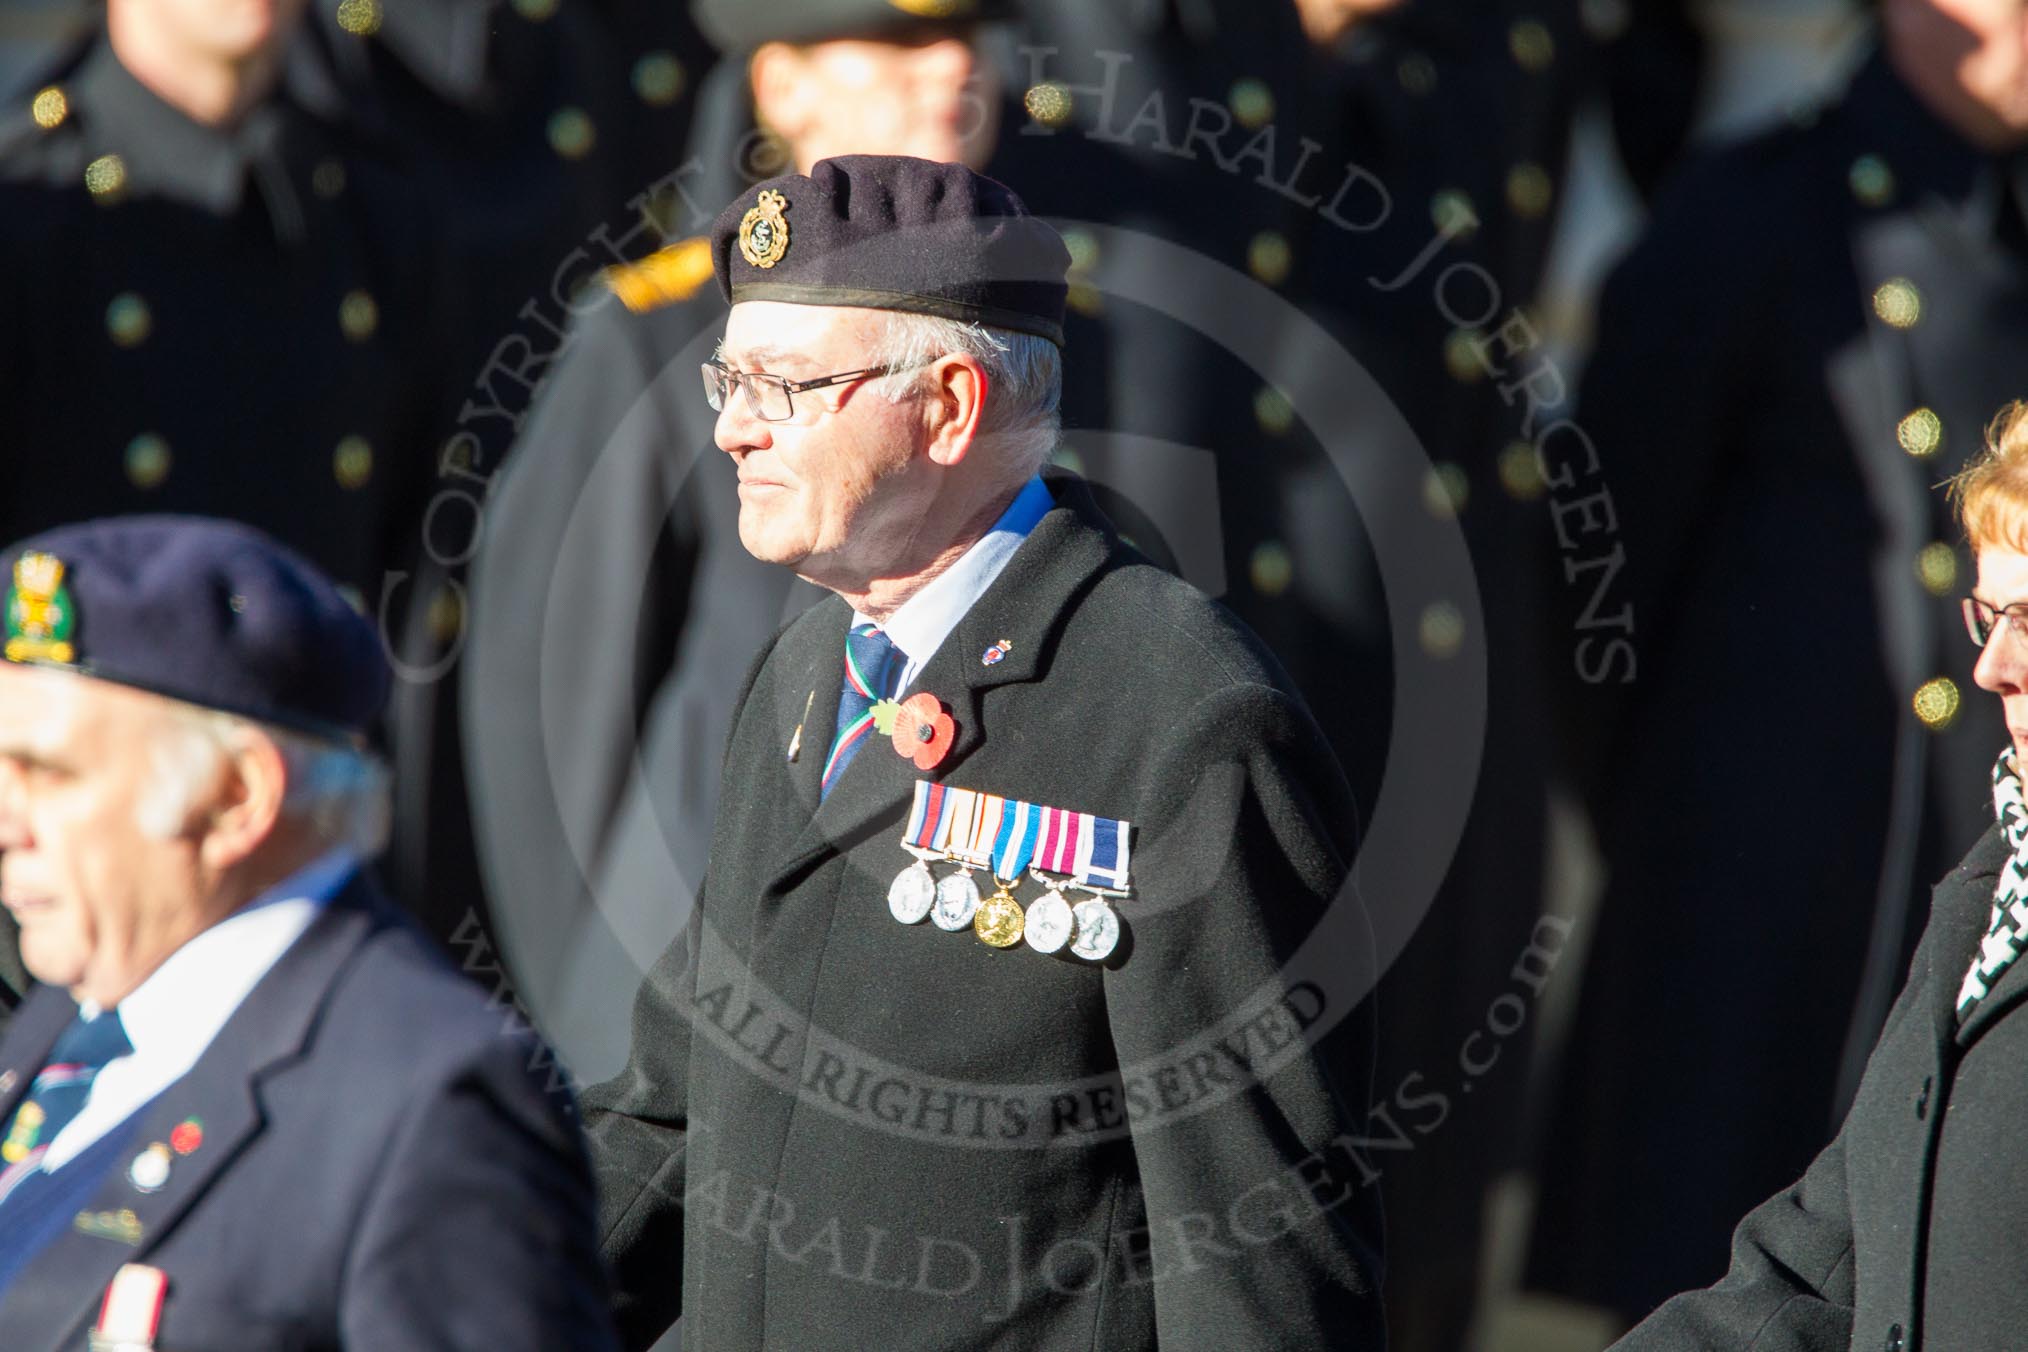 Remembrance Sunday Cenotaph March Past 2013: E32 - Royal Naval Communications Association..
Press stand opposite the Foreign Office building, Whitehall, London SW1,
London,
Greater London,
United Kingdom,
on 10 November 2013 at 11:48, image #635